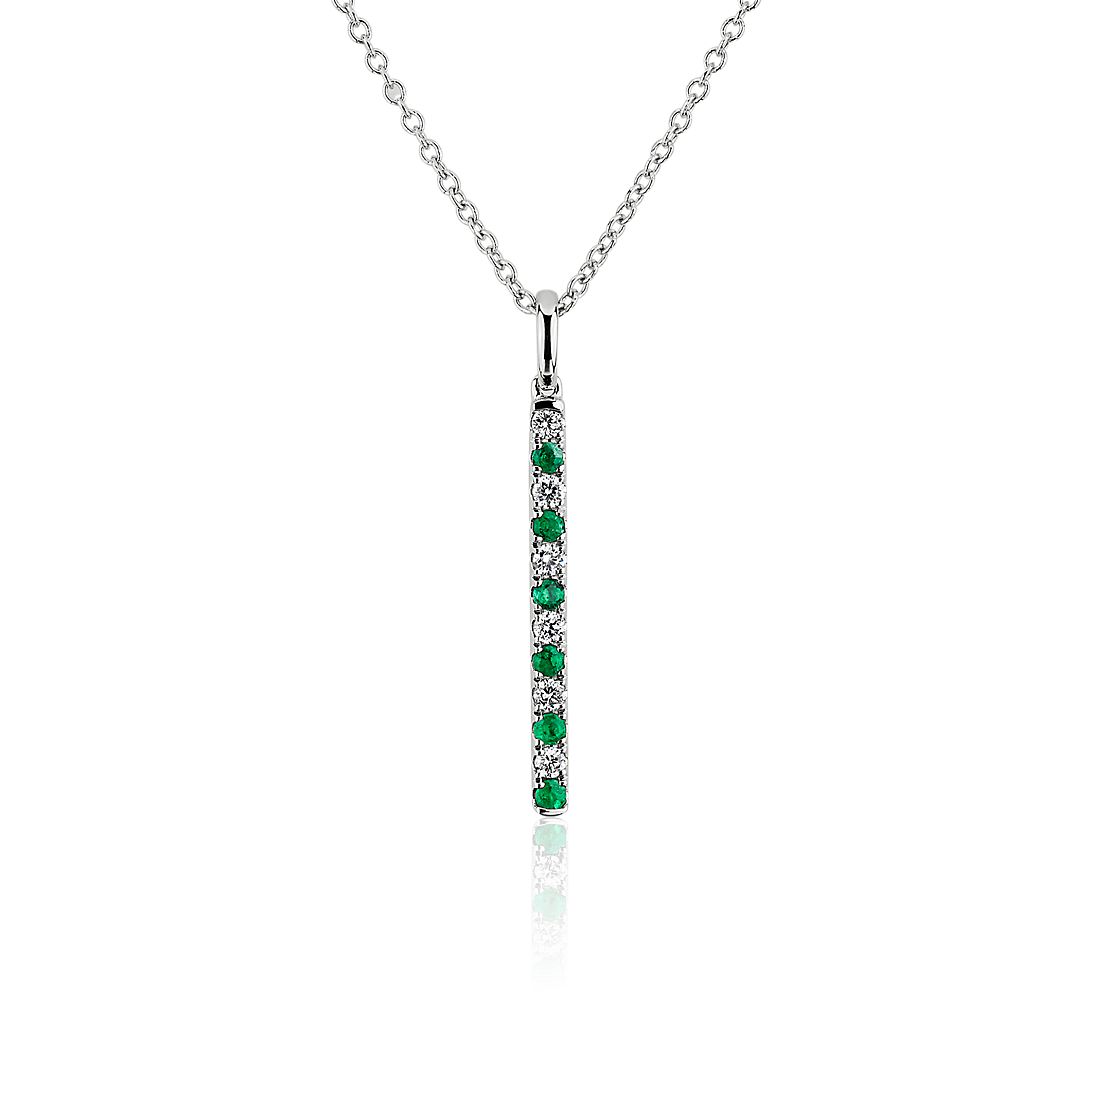 14k white gold vertical bar pendant with alternating emeralds and diamonds